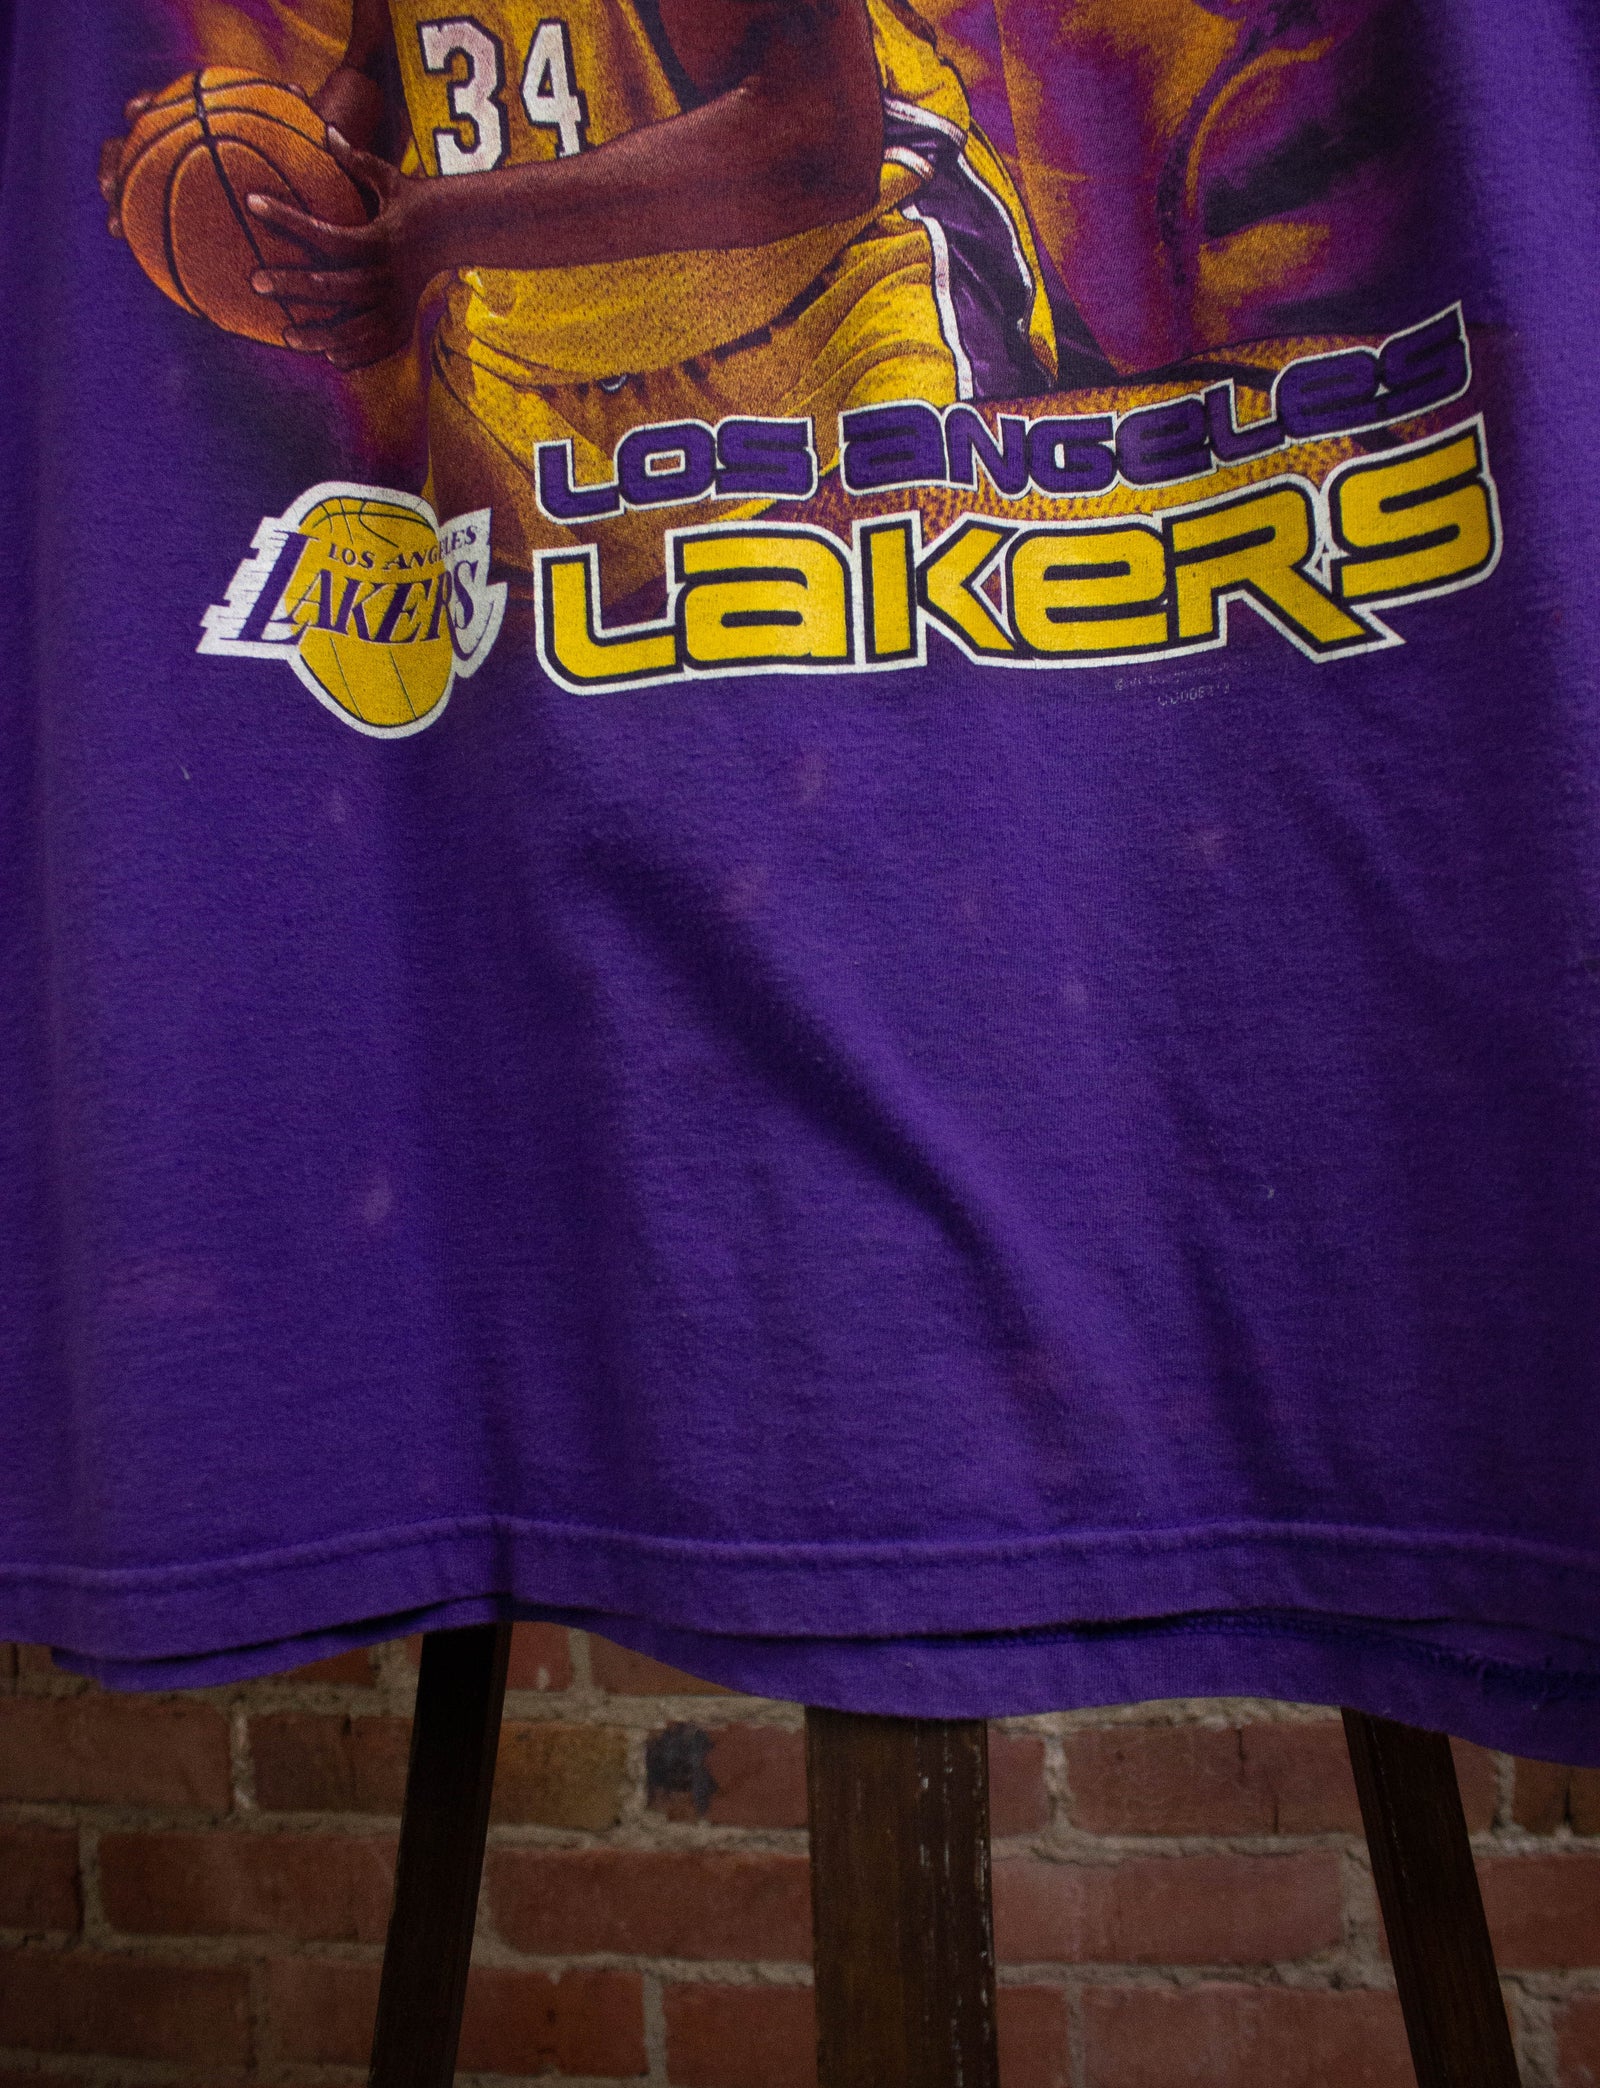 NBA Los Angeles Lakers Graphic Jersey